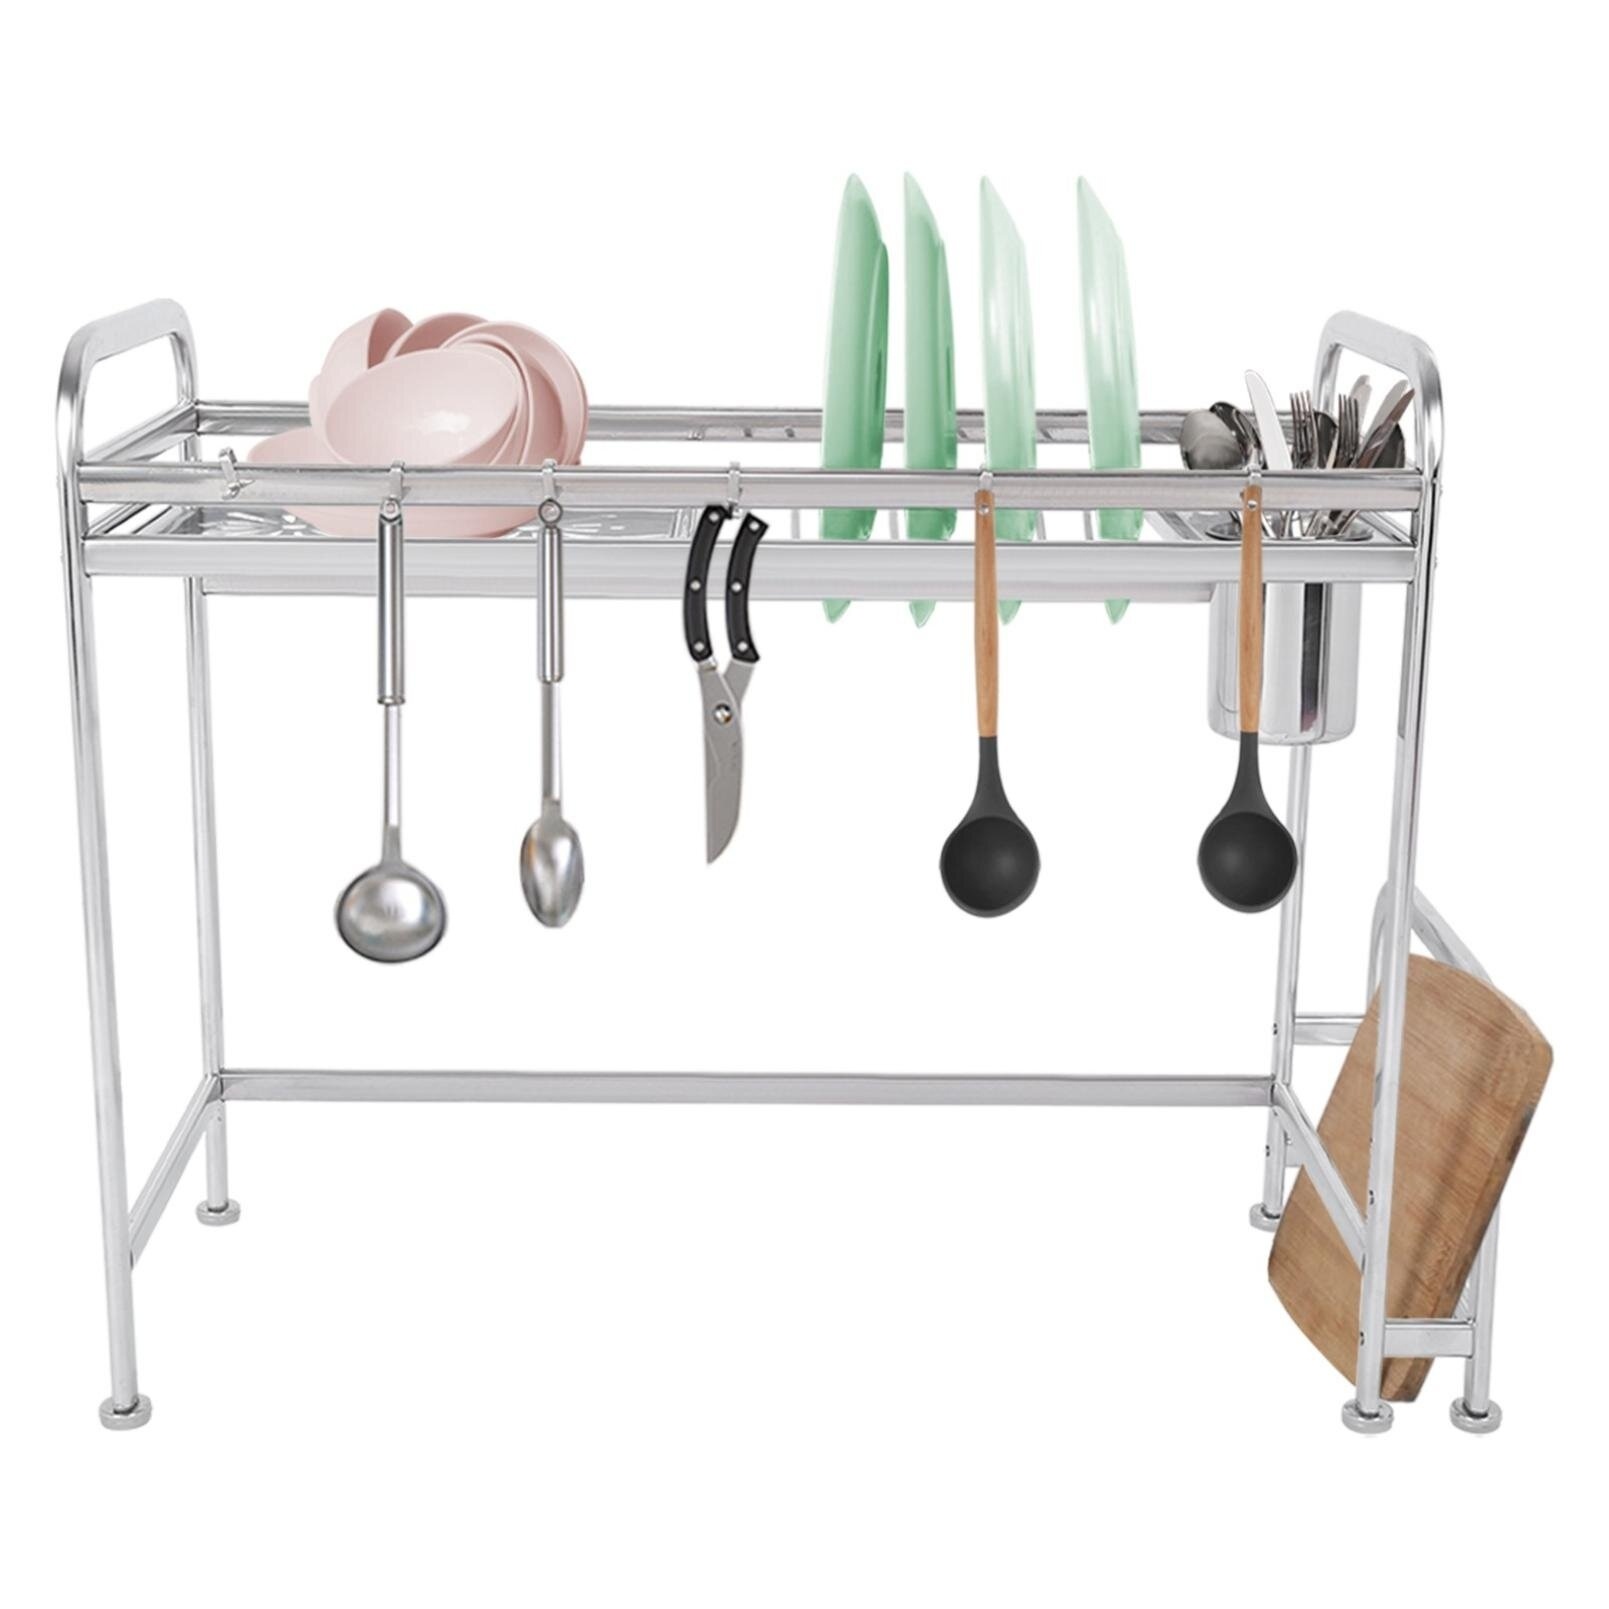 https://visualhunt.com/photos/23/stainless-steel-dish-drying-rack-over-the-sink-kitchen-drainer-holder.jpg